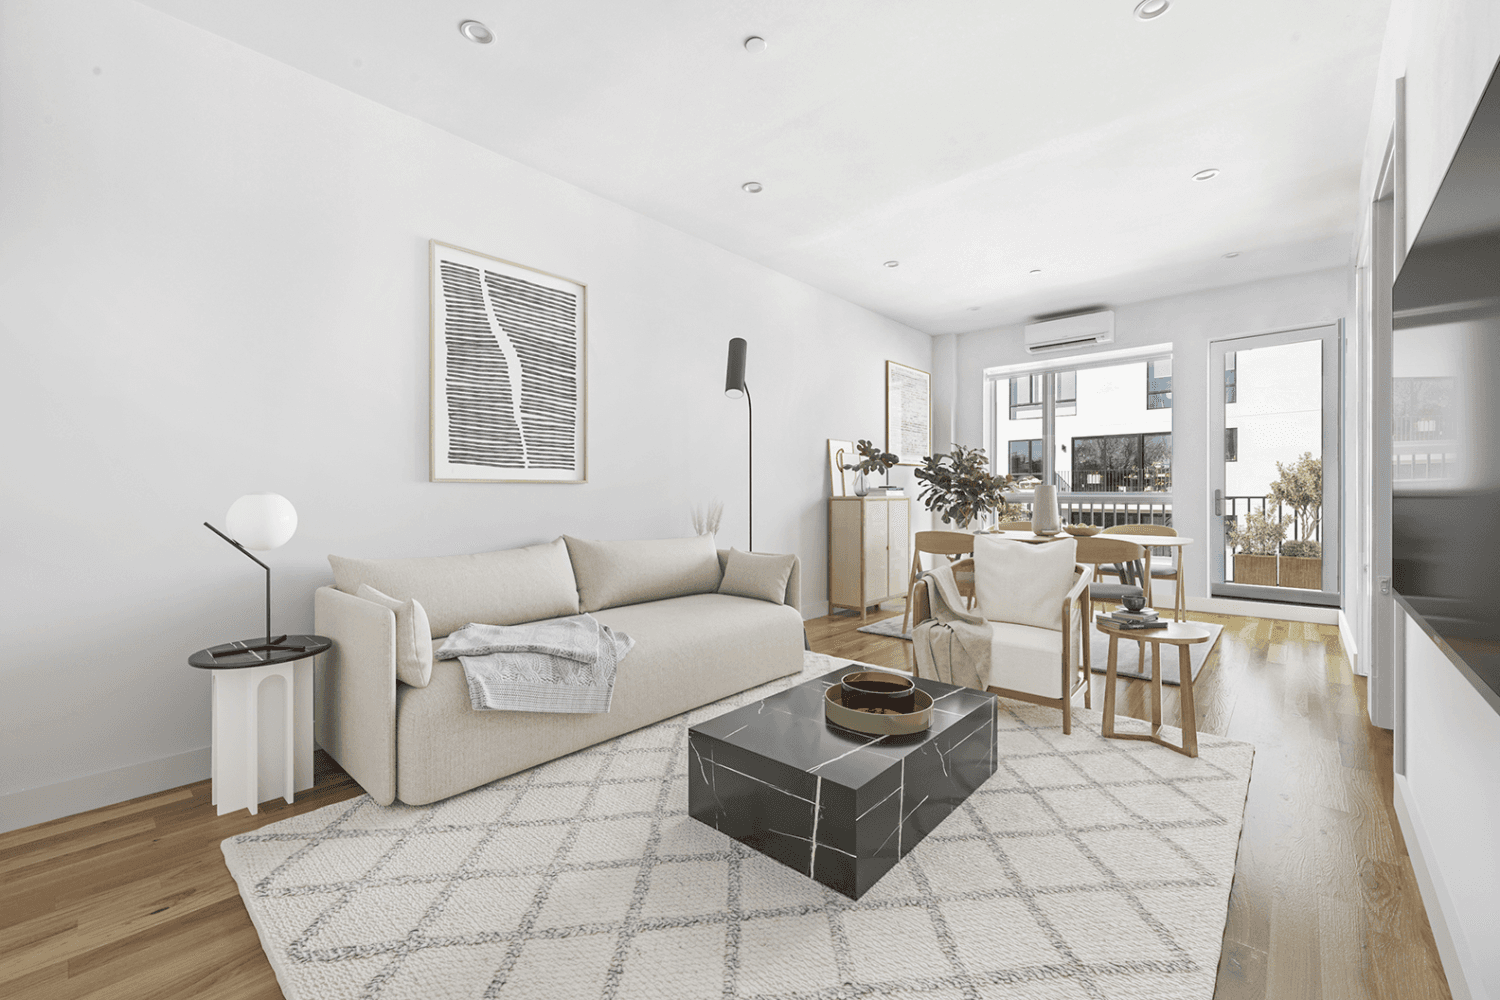 5. 875 financing for qualified buyers from Valley National Bank Community Plus ProgramWelcome to this exceptional new residence in the vibrant neighborhood of Brooklyn.